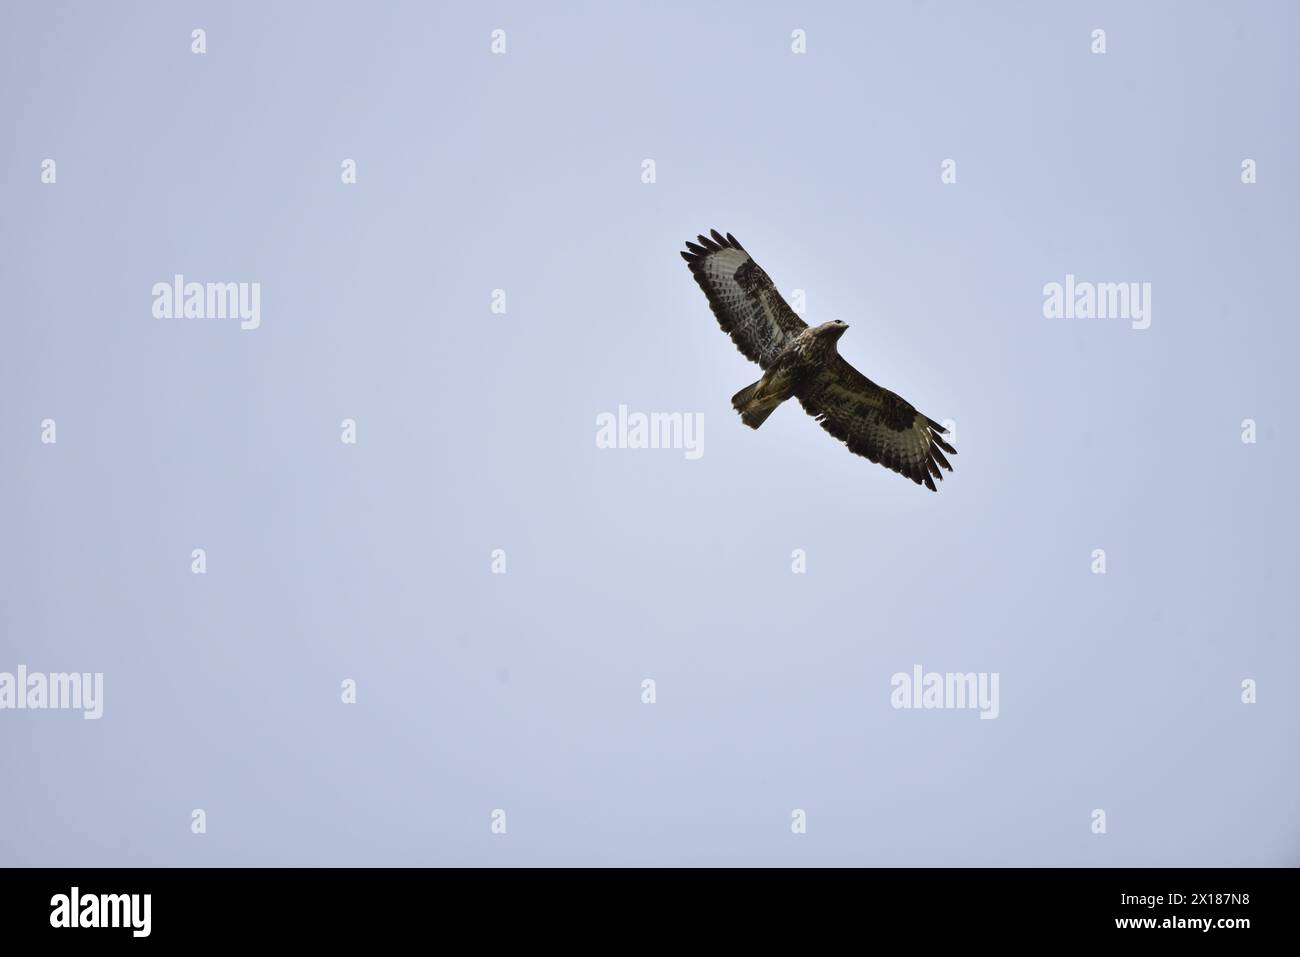 Underneath View of a Common Buzzard (Buteo buteo) Soaring Upwards from Left to Right, against a Pale Blue Sky, taken in mid-Wales, UK in April Stock Photo